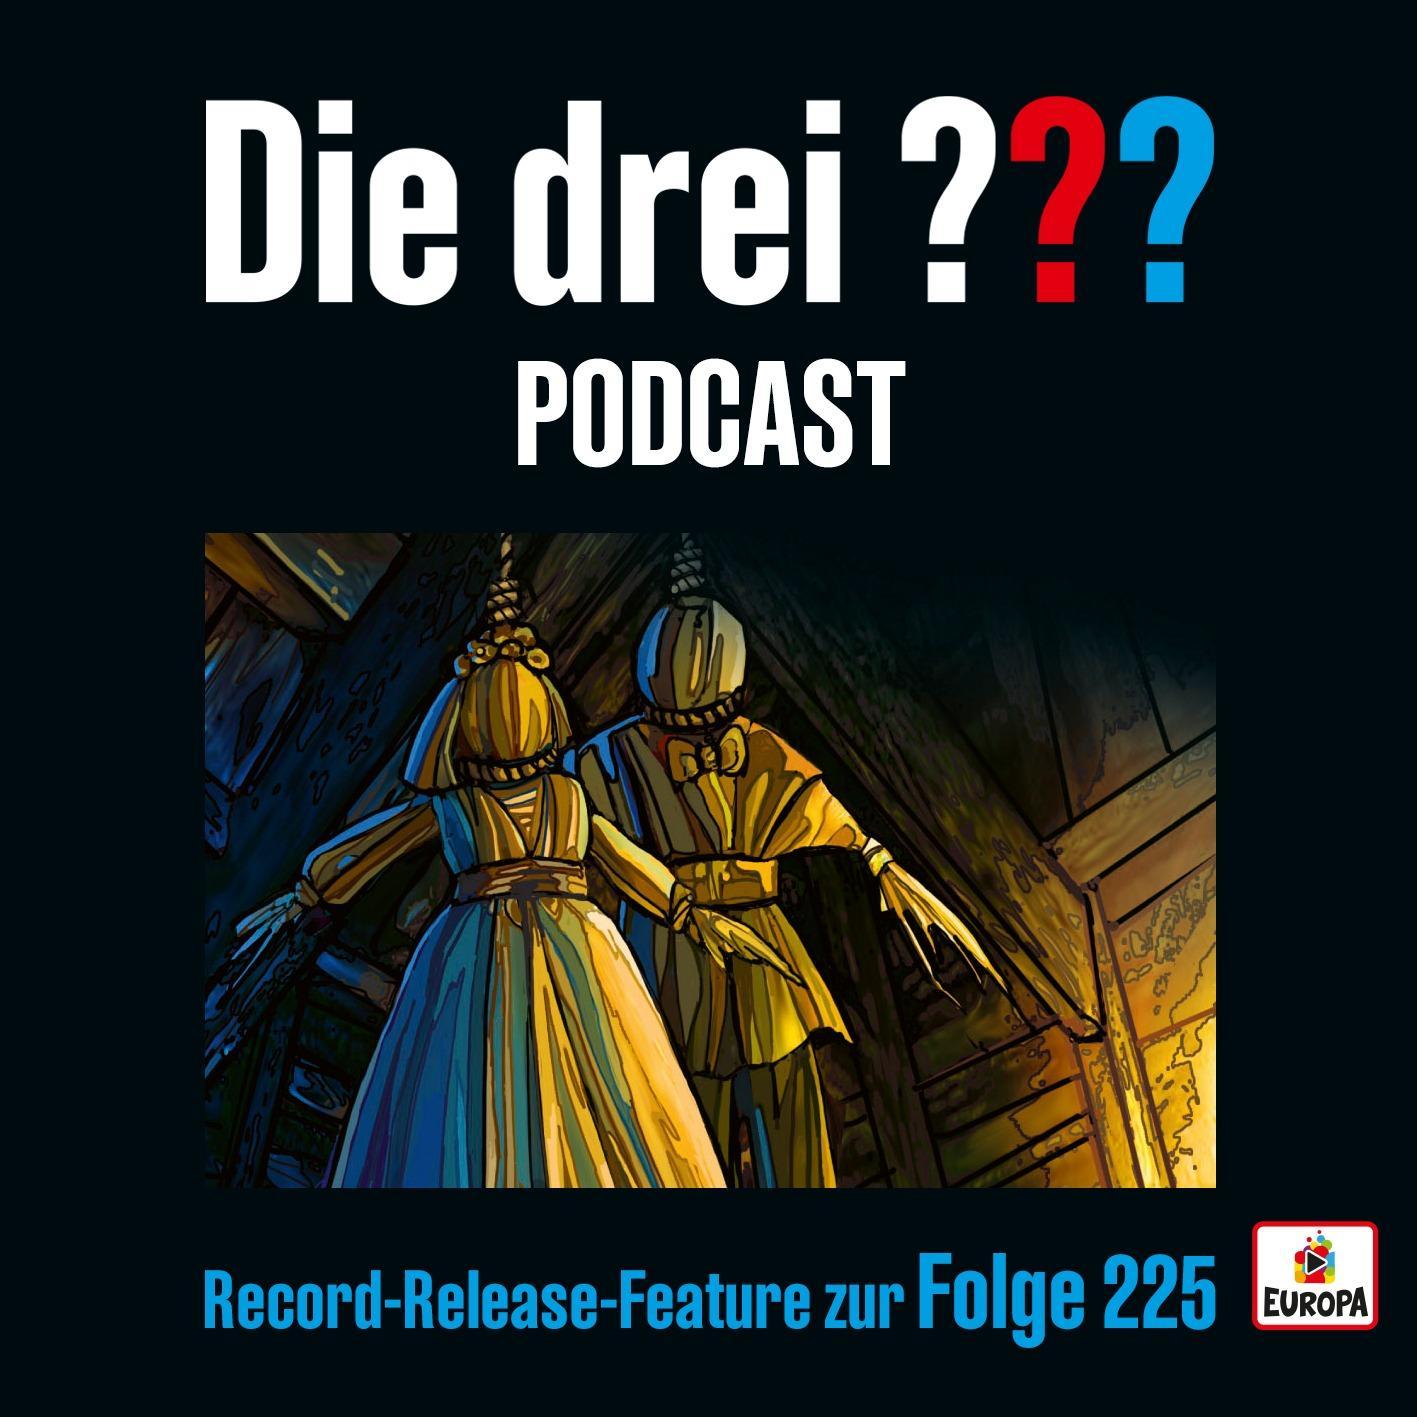 Record-Release-Feature zur Folge 225